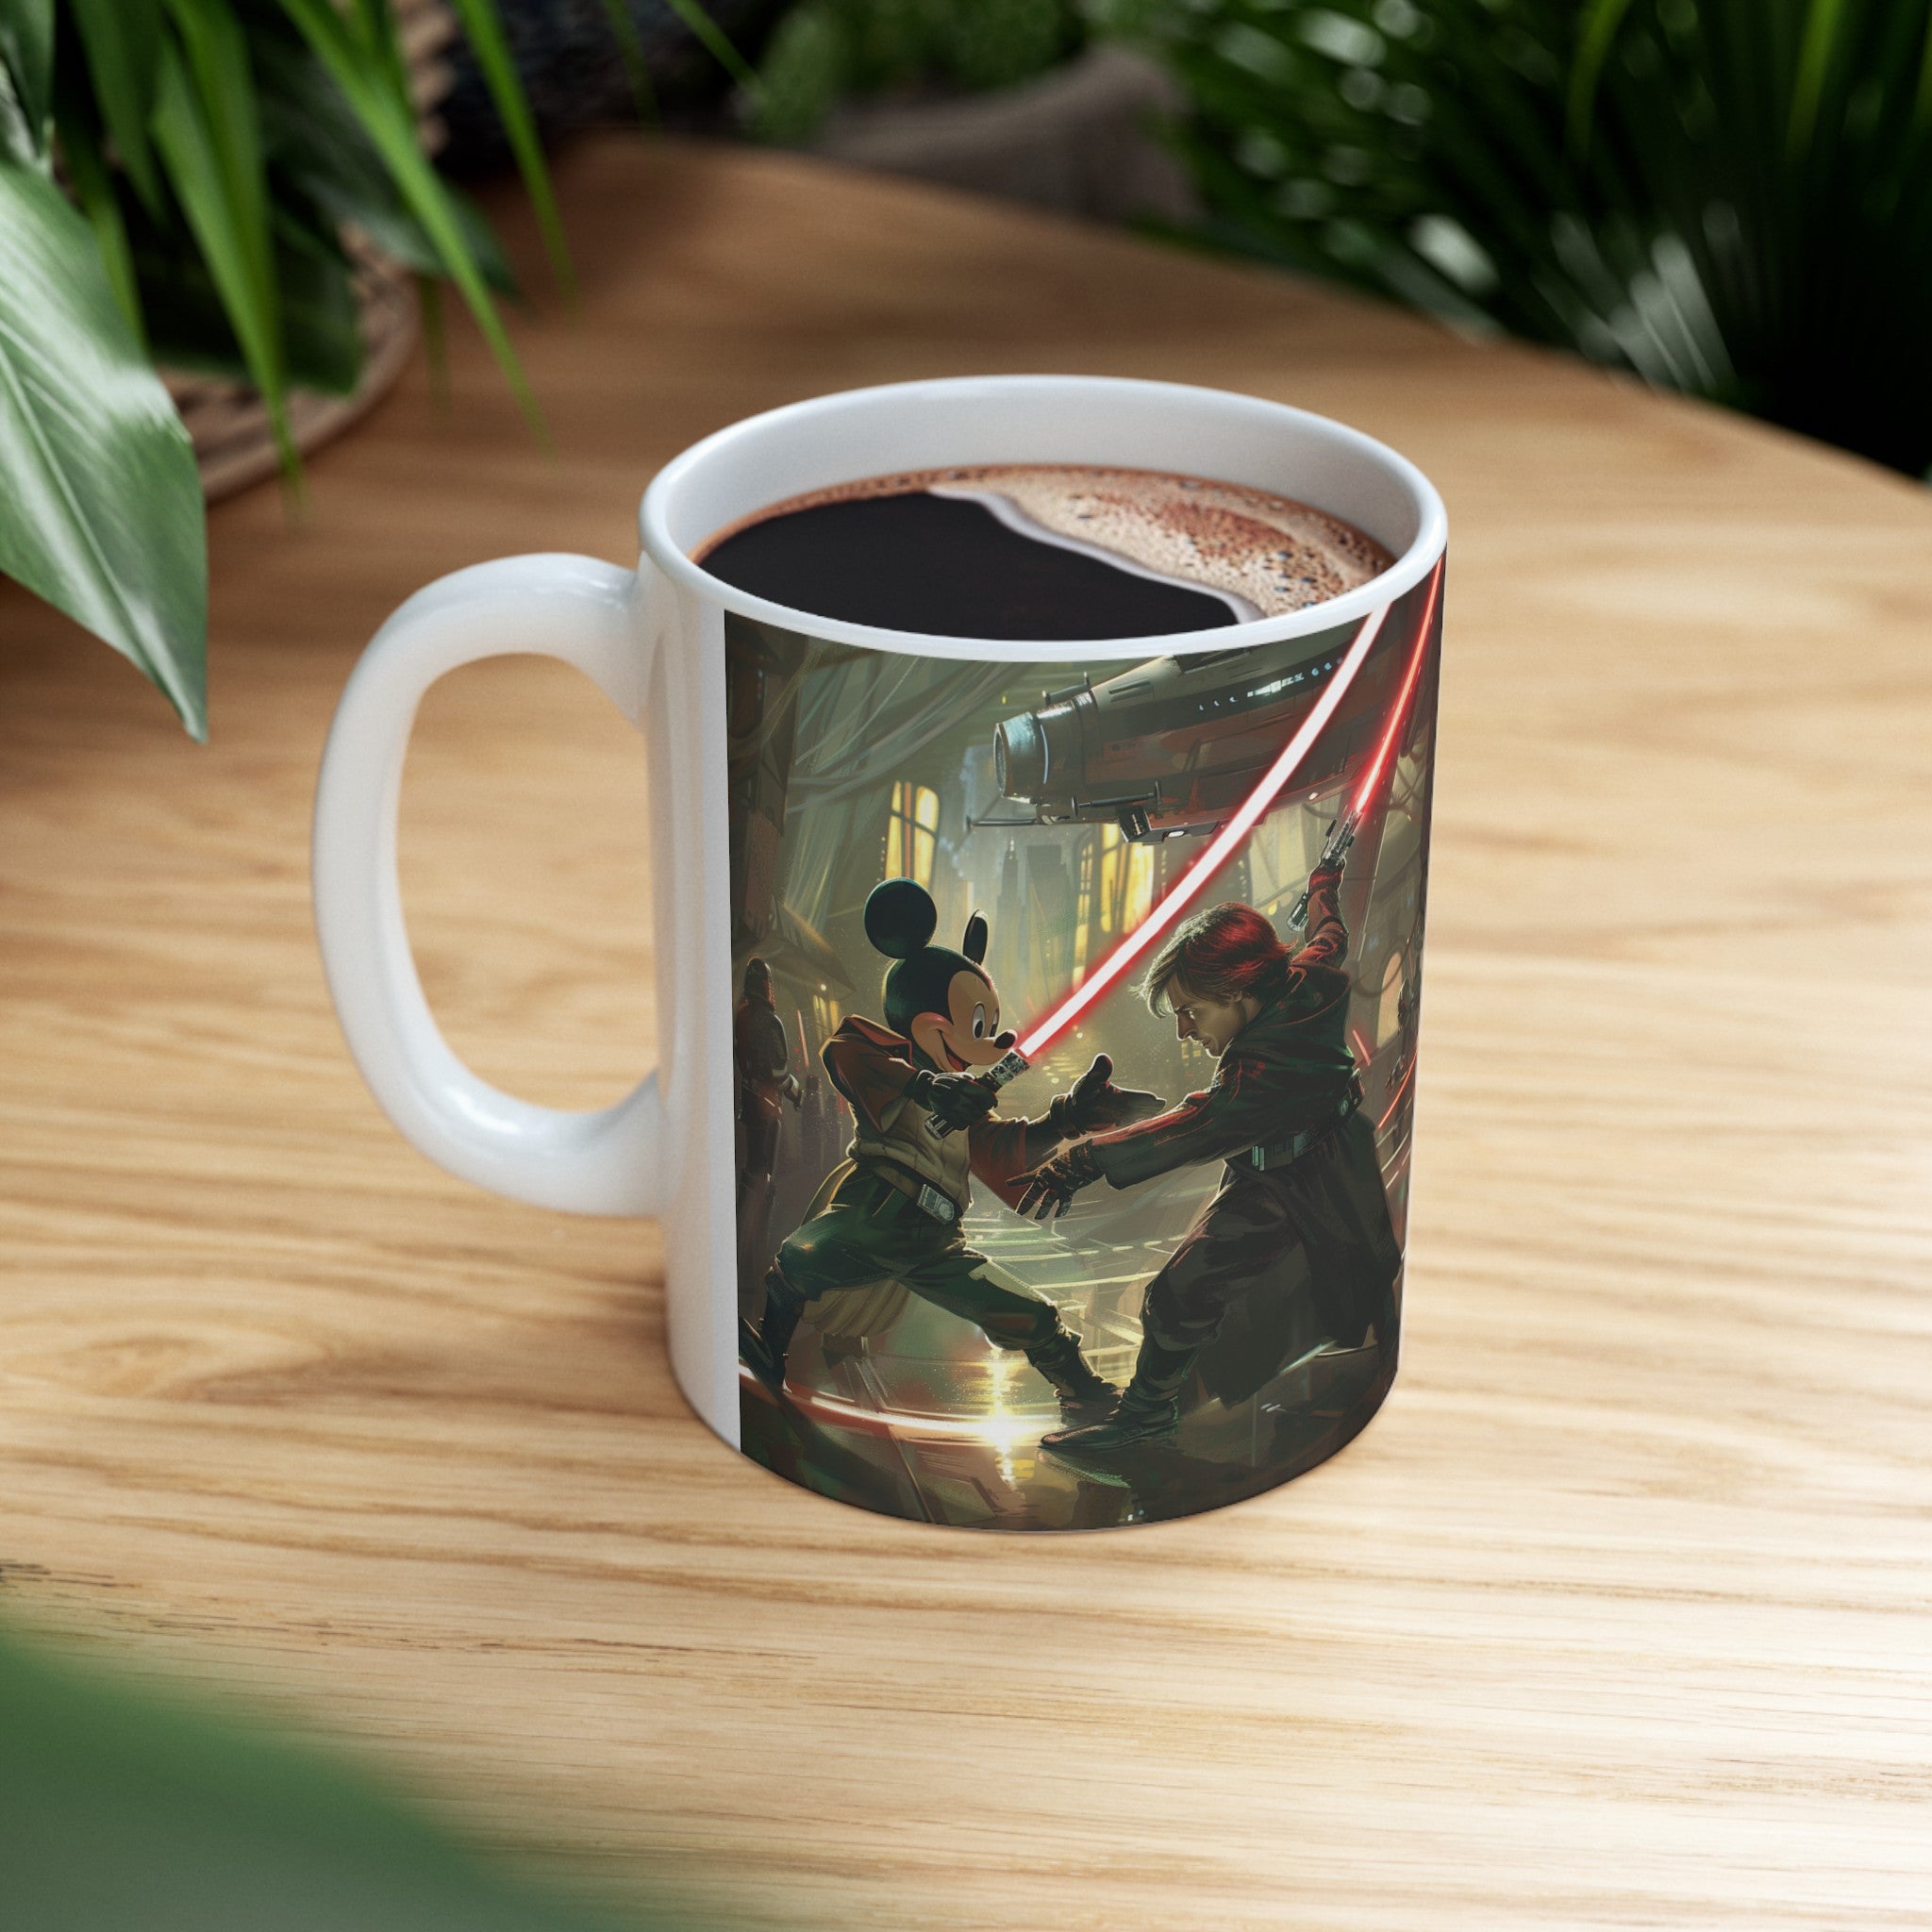 The image showcases a beautifully crafted ceramic mug, available in both 11oz and 15oz sizes. The mug is adorned with a colorful, detailed illustration of a fantasy kingdom in battle, featuring knights, dragons, and castles under siege, designed to captivate and inspire with every use.